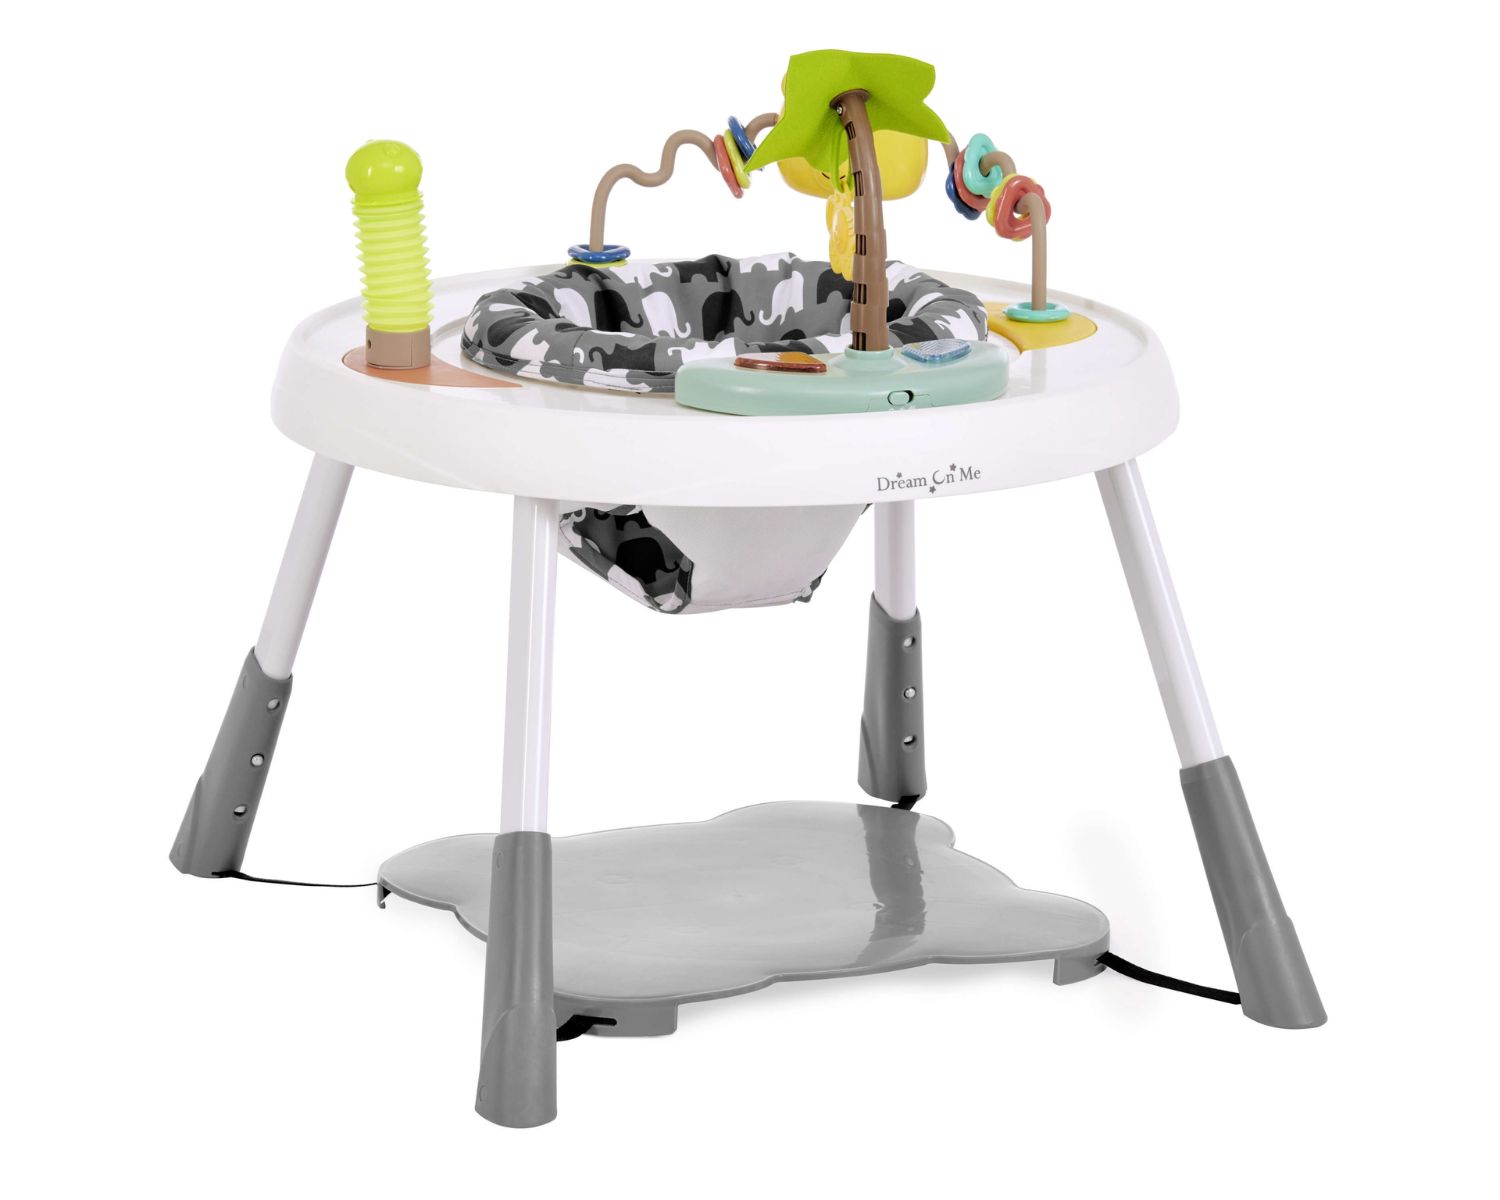 Baby Activity Center Review: The Best Options for Your Little One